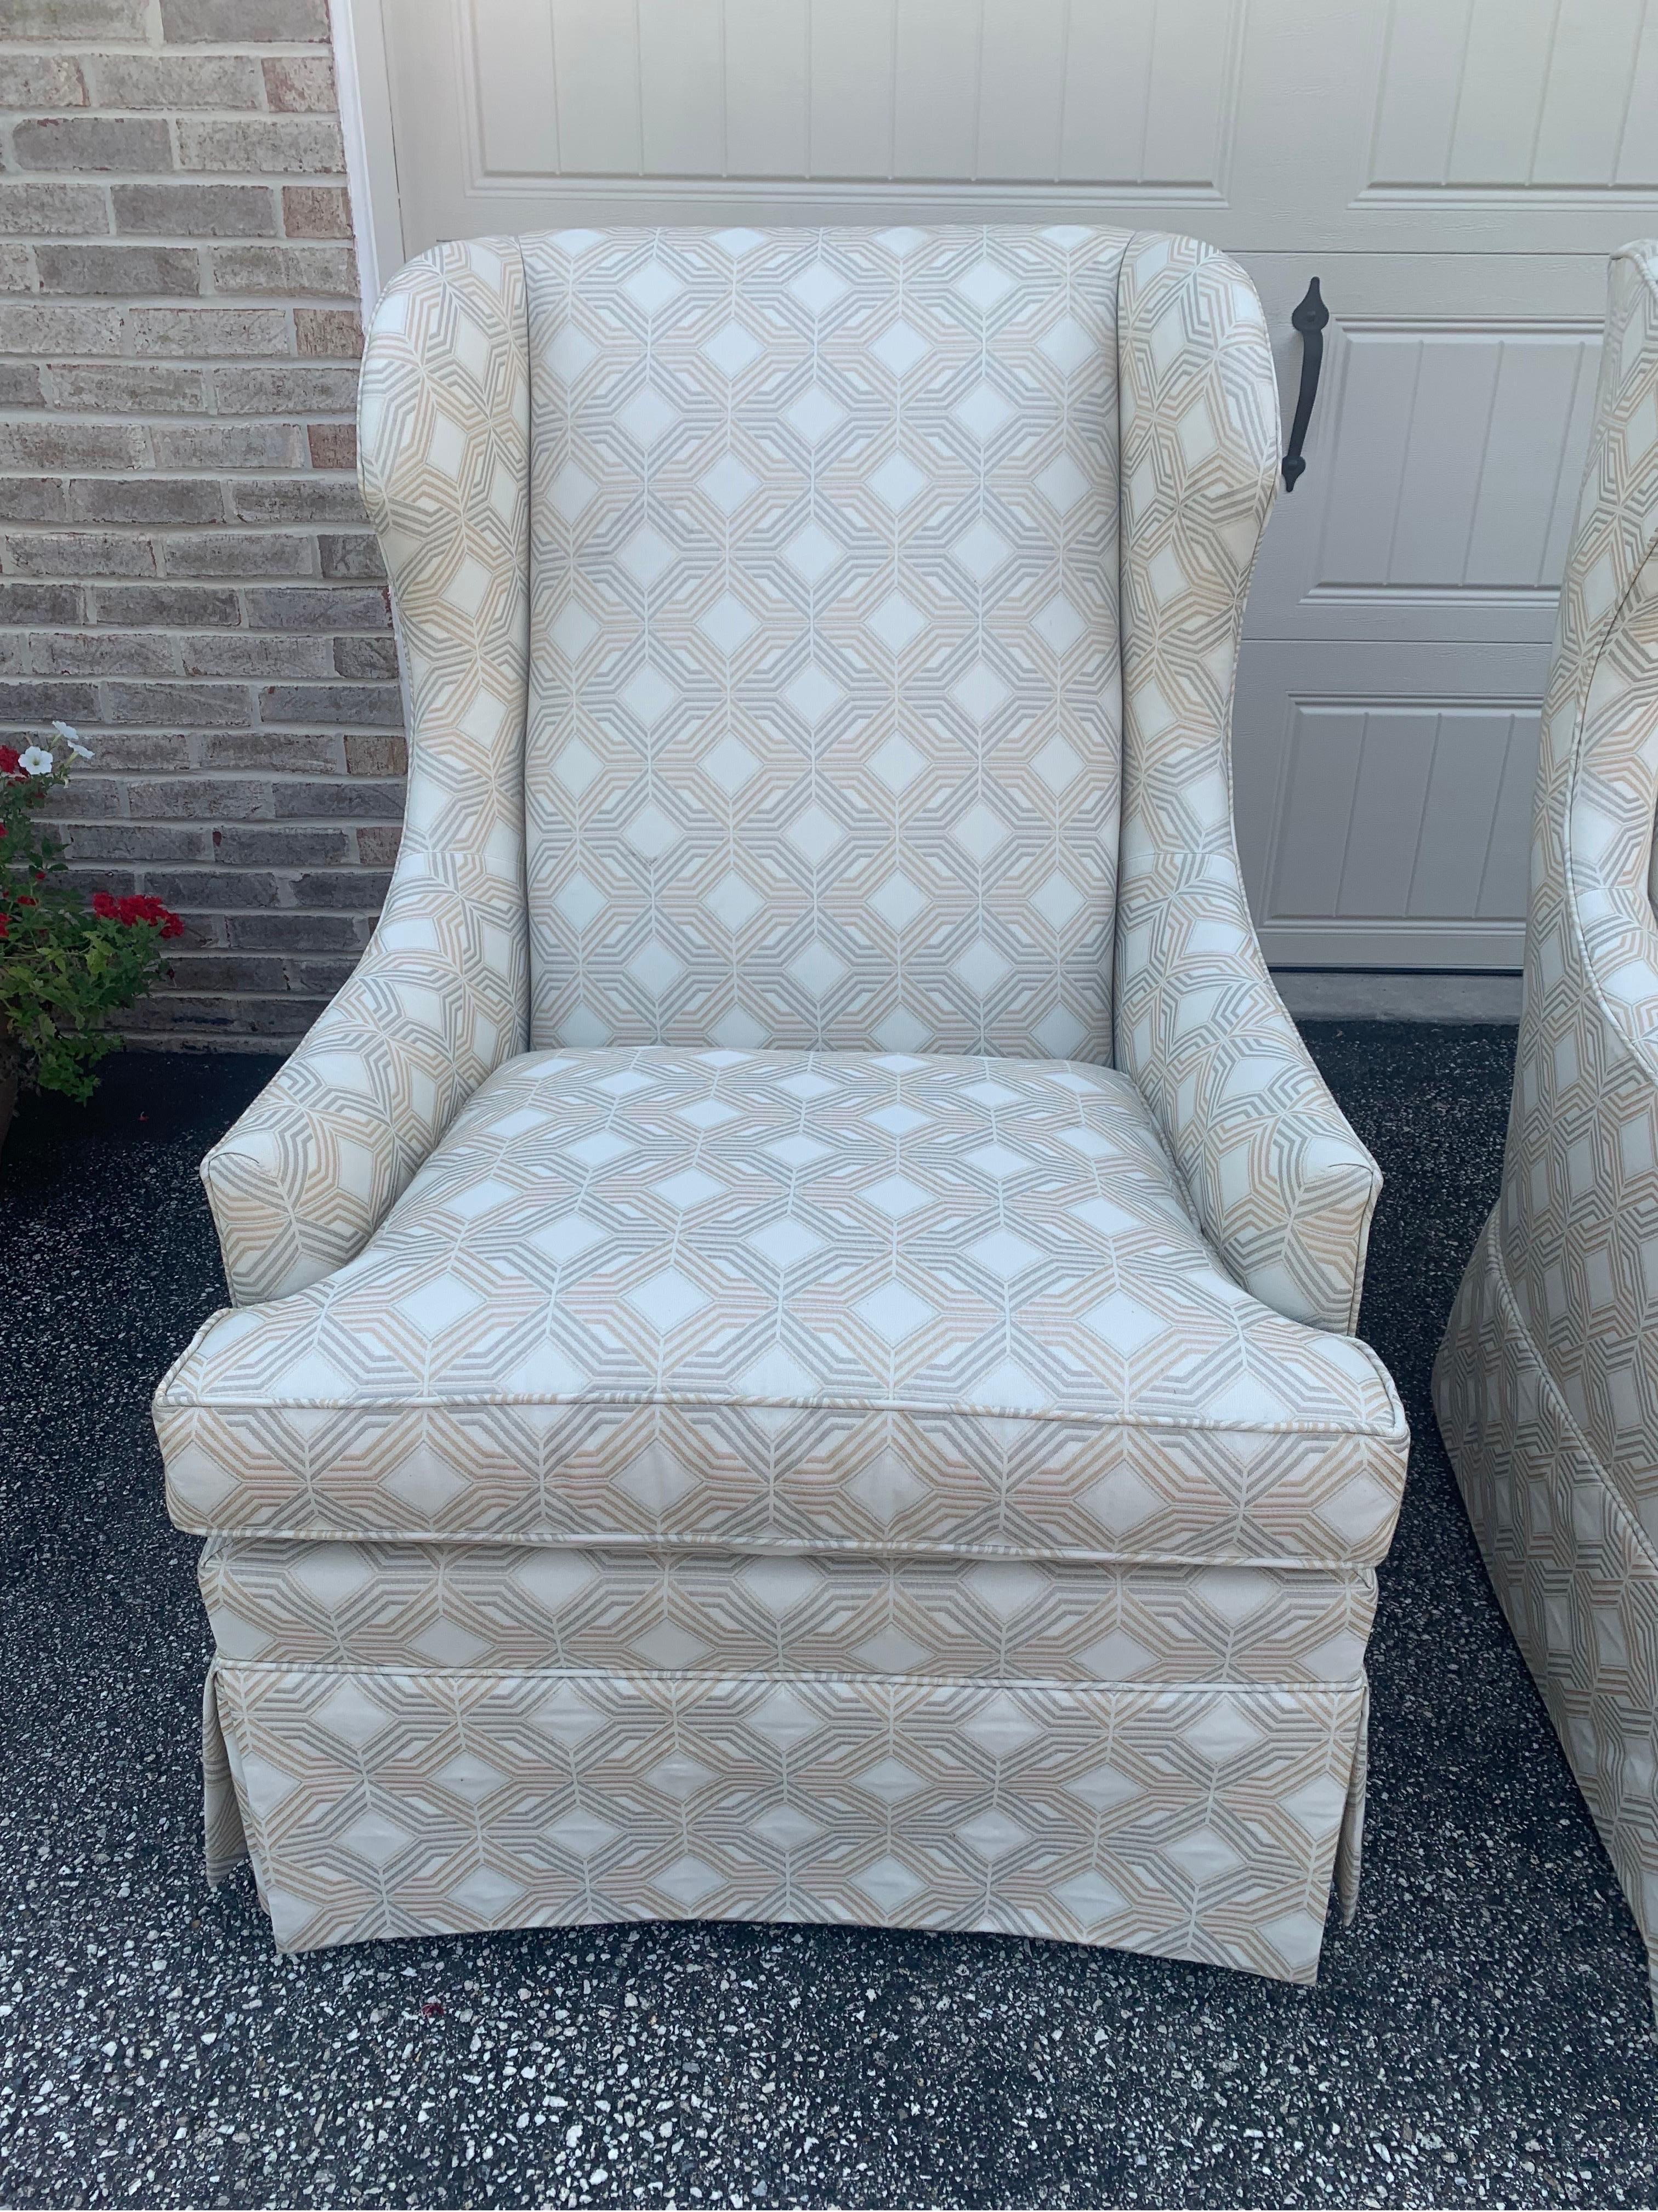 Absolutely gorgeous set of 2 upholstered skirted wingback chairs by Theodore Alexander. The chairs are in great condition with a couple minor marks on the back. 

Chairs measure:
45